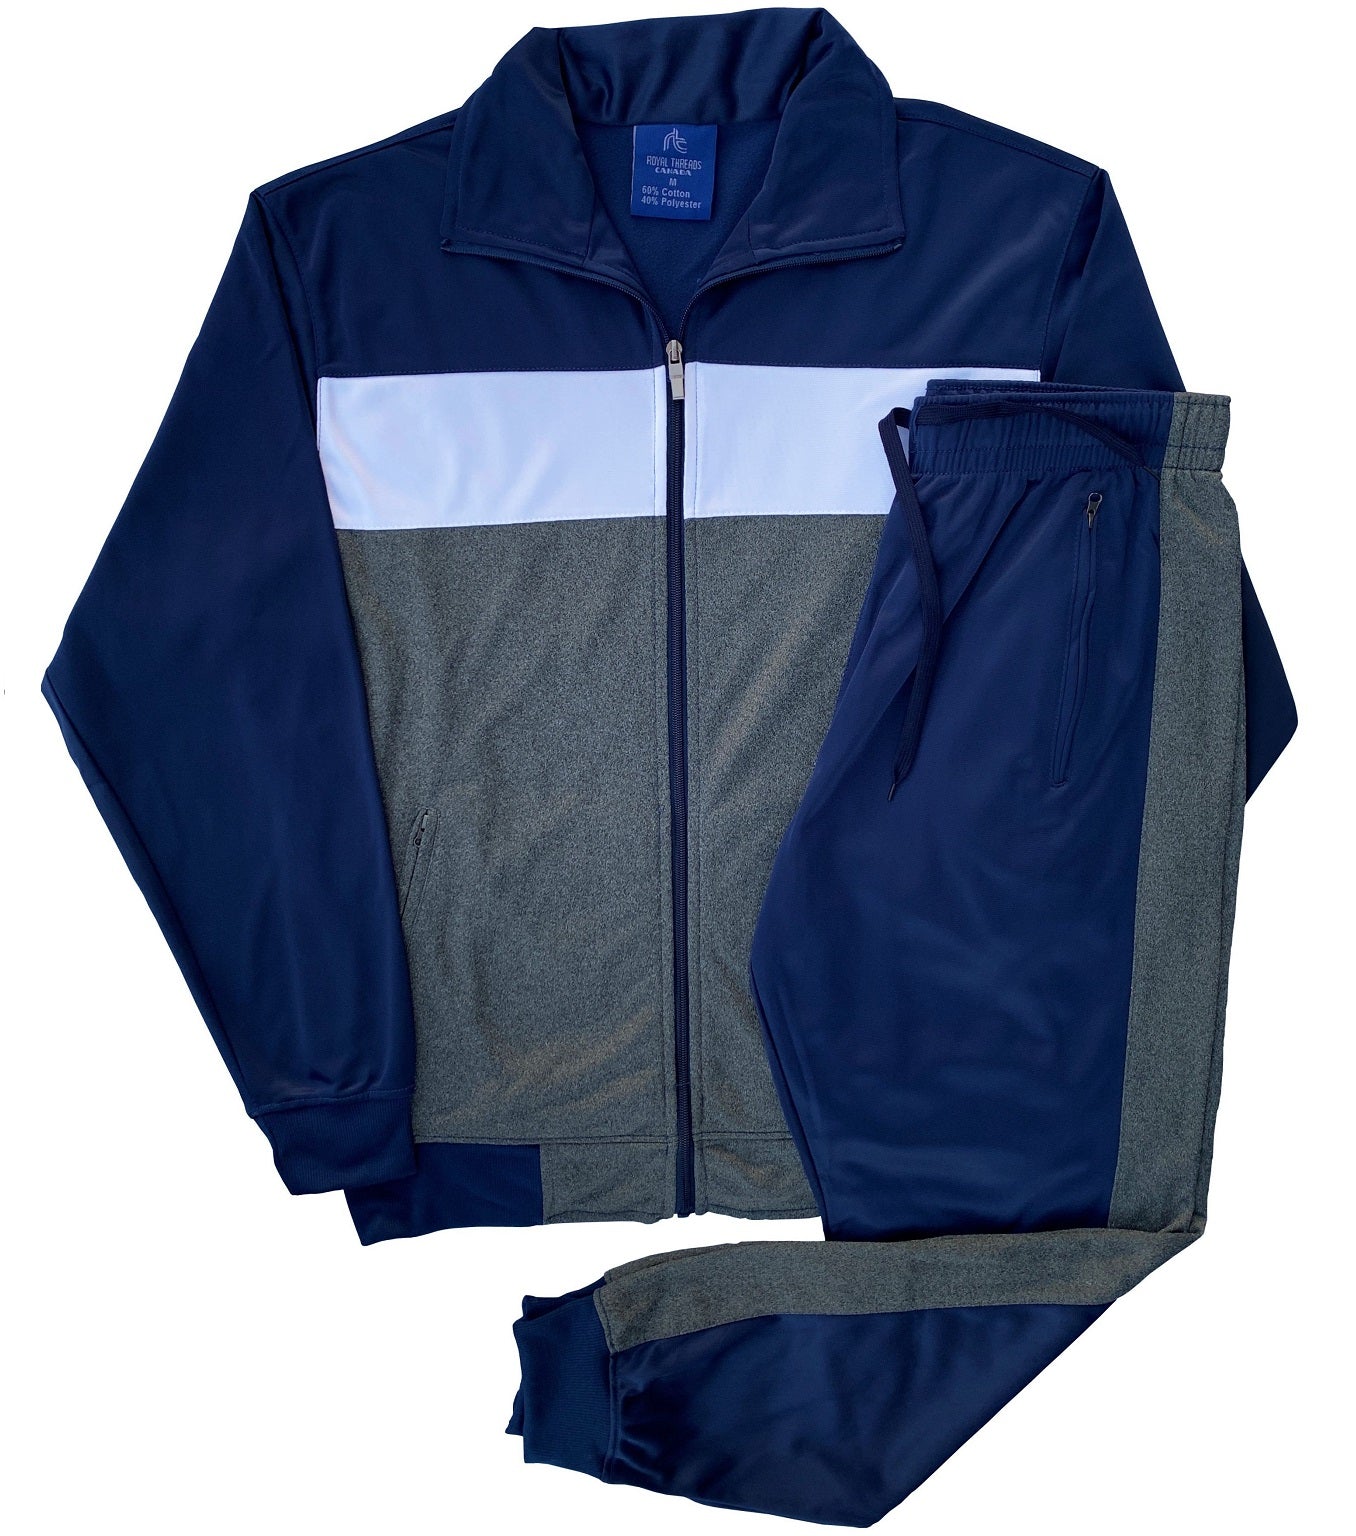 Men's Moonstone Jogger Track Jacket and Track Pants Outfit